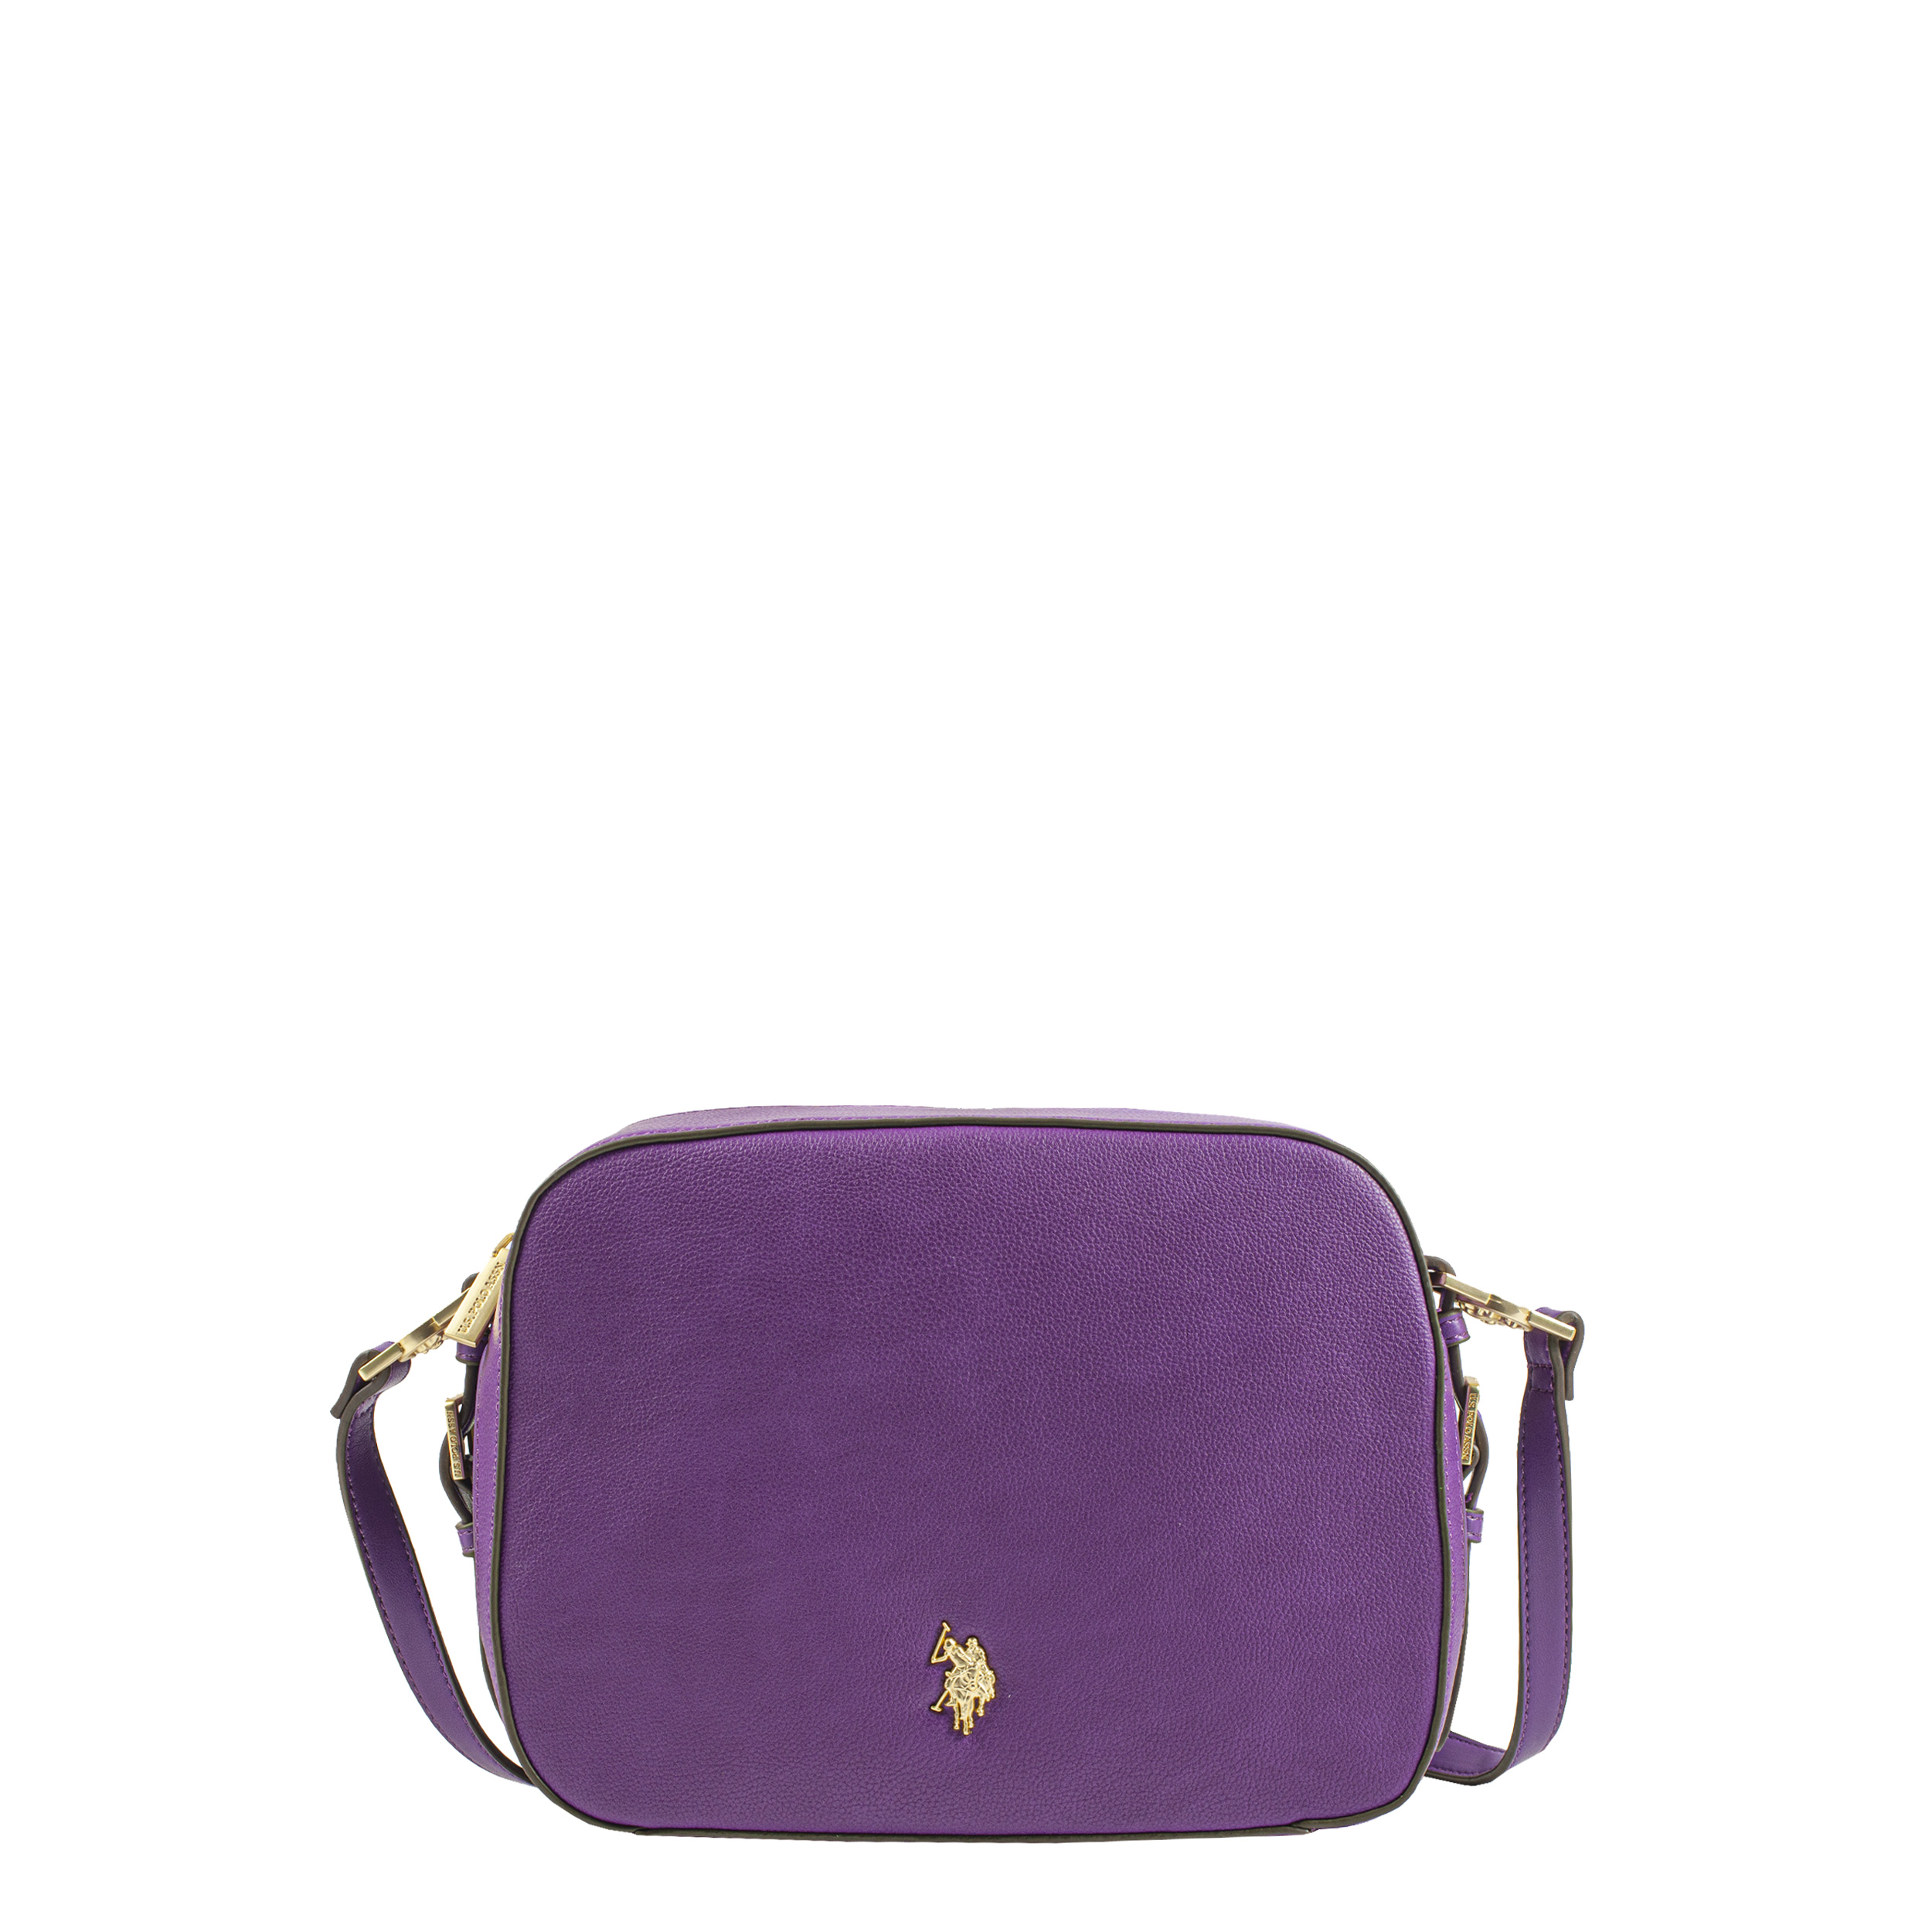 Sac travers US Polo Forest violet avant